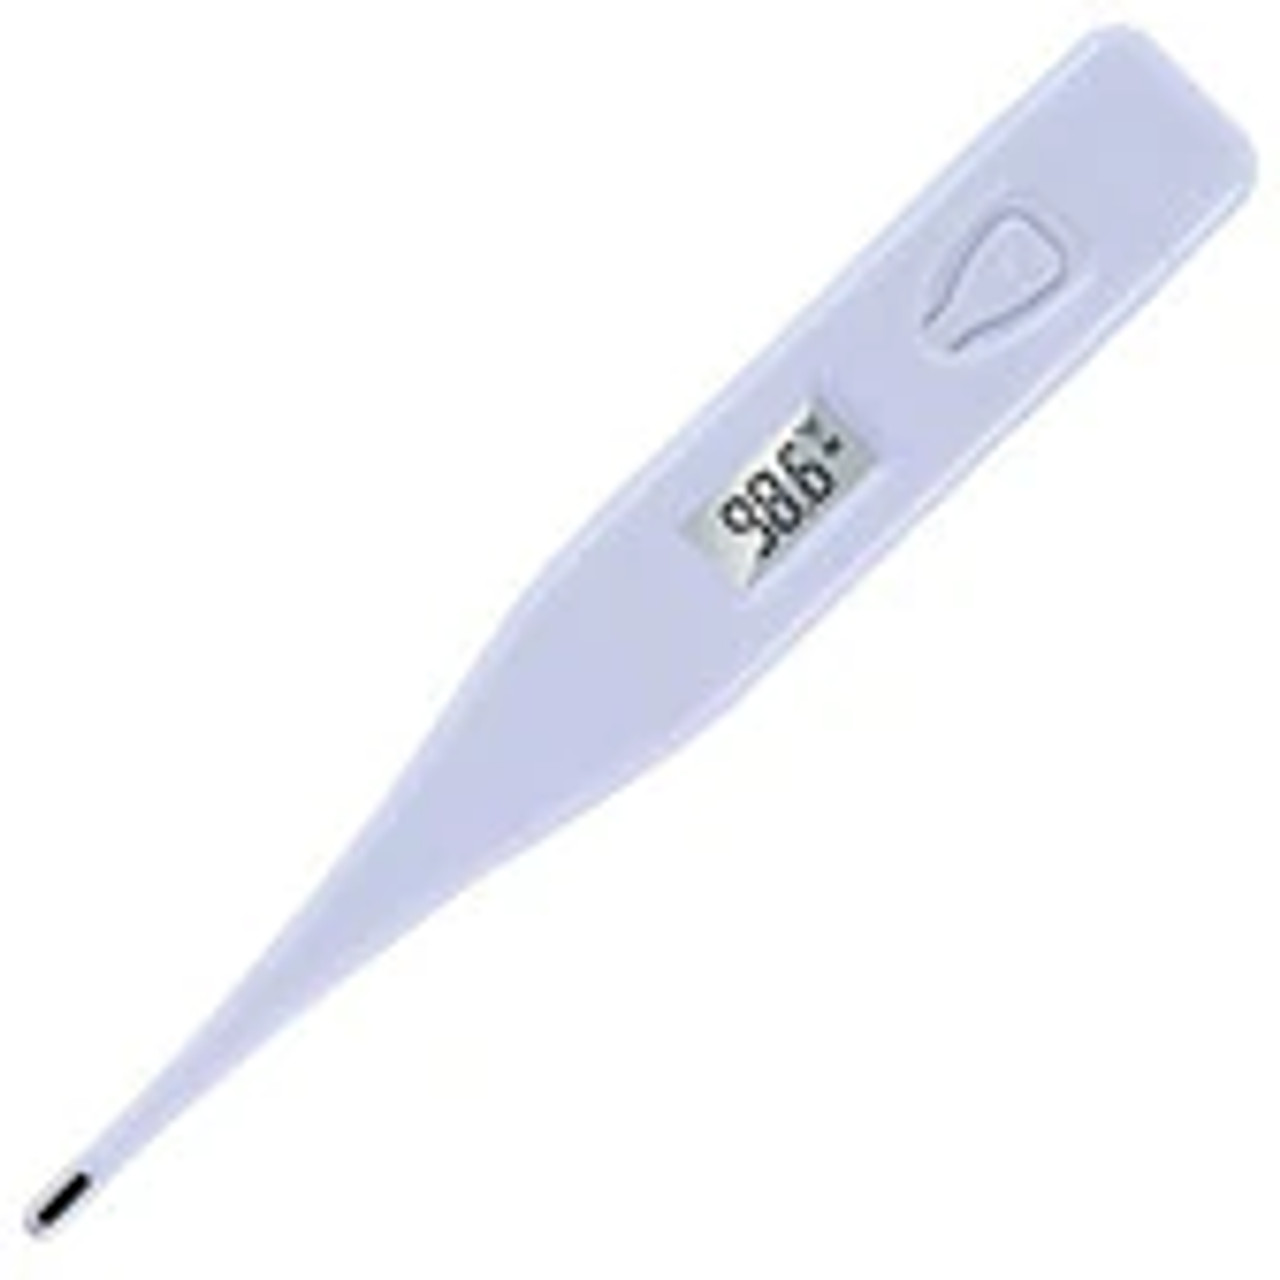 Graham-Field 1858 HealthTeam Disposable Digital Thermometer with 200-Hour  Battery Life & Memory Recall, Pack of 24: Oral Thermometers: :  Industrial & Scientific